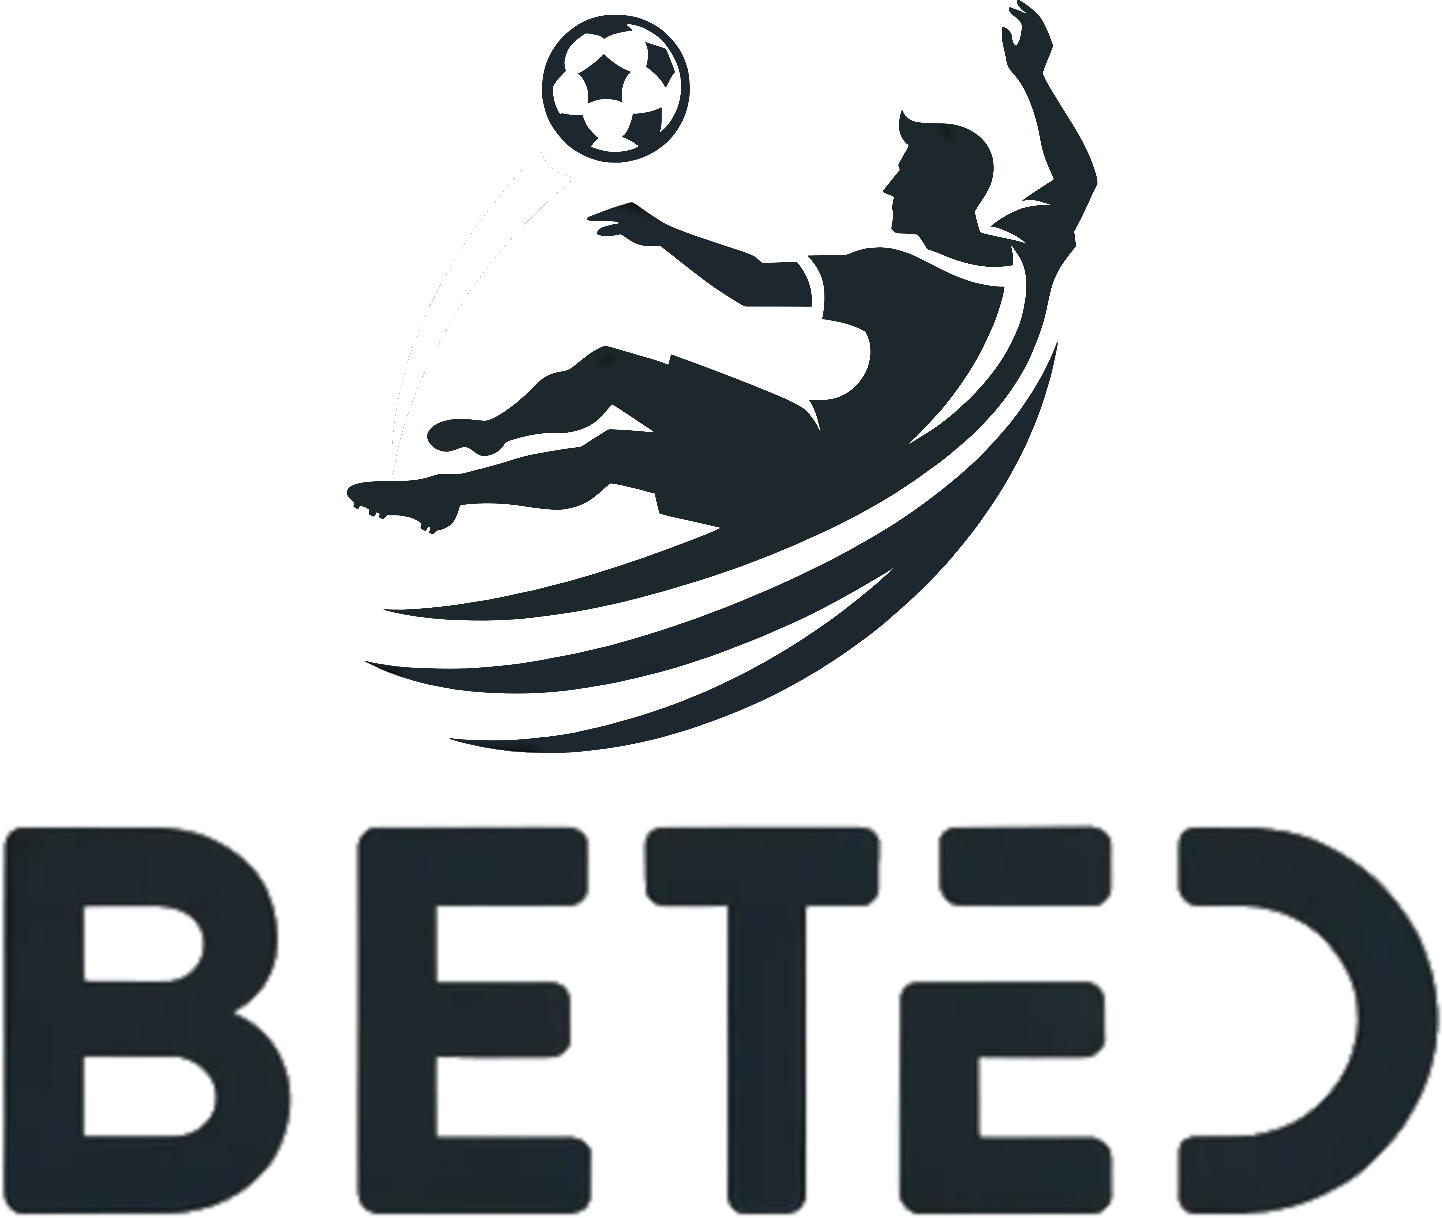 betED.com